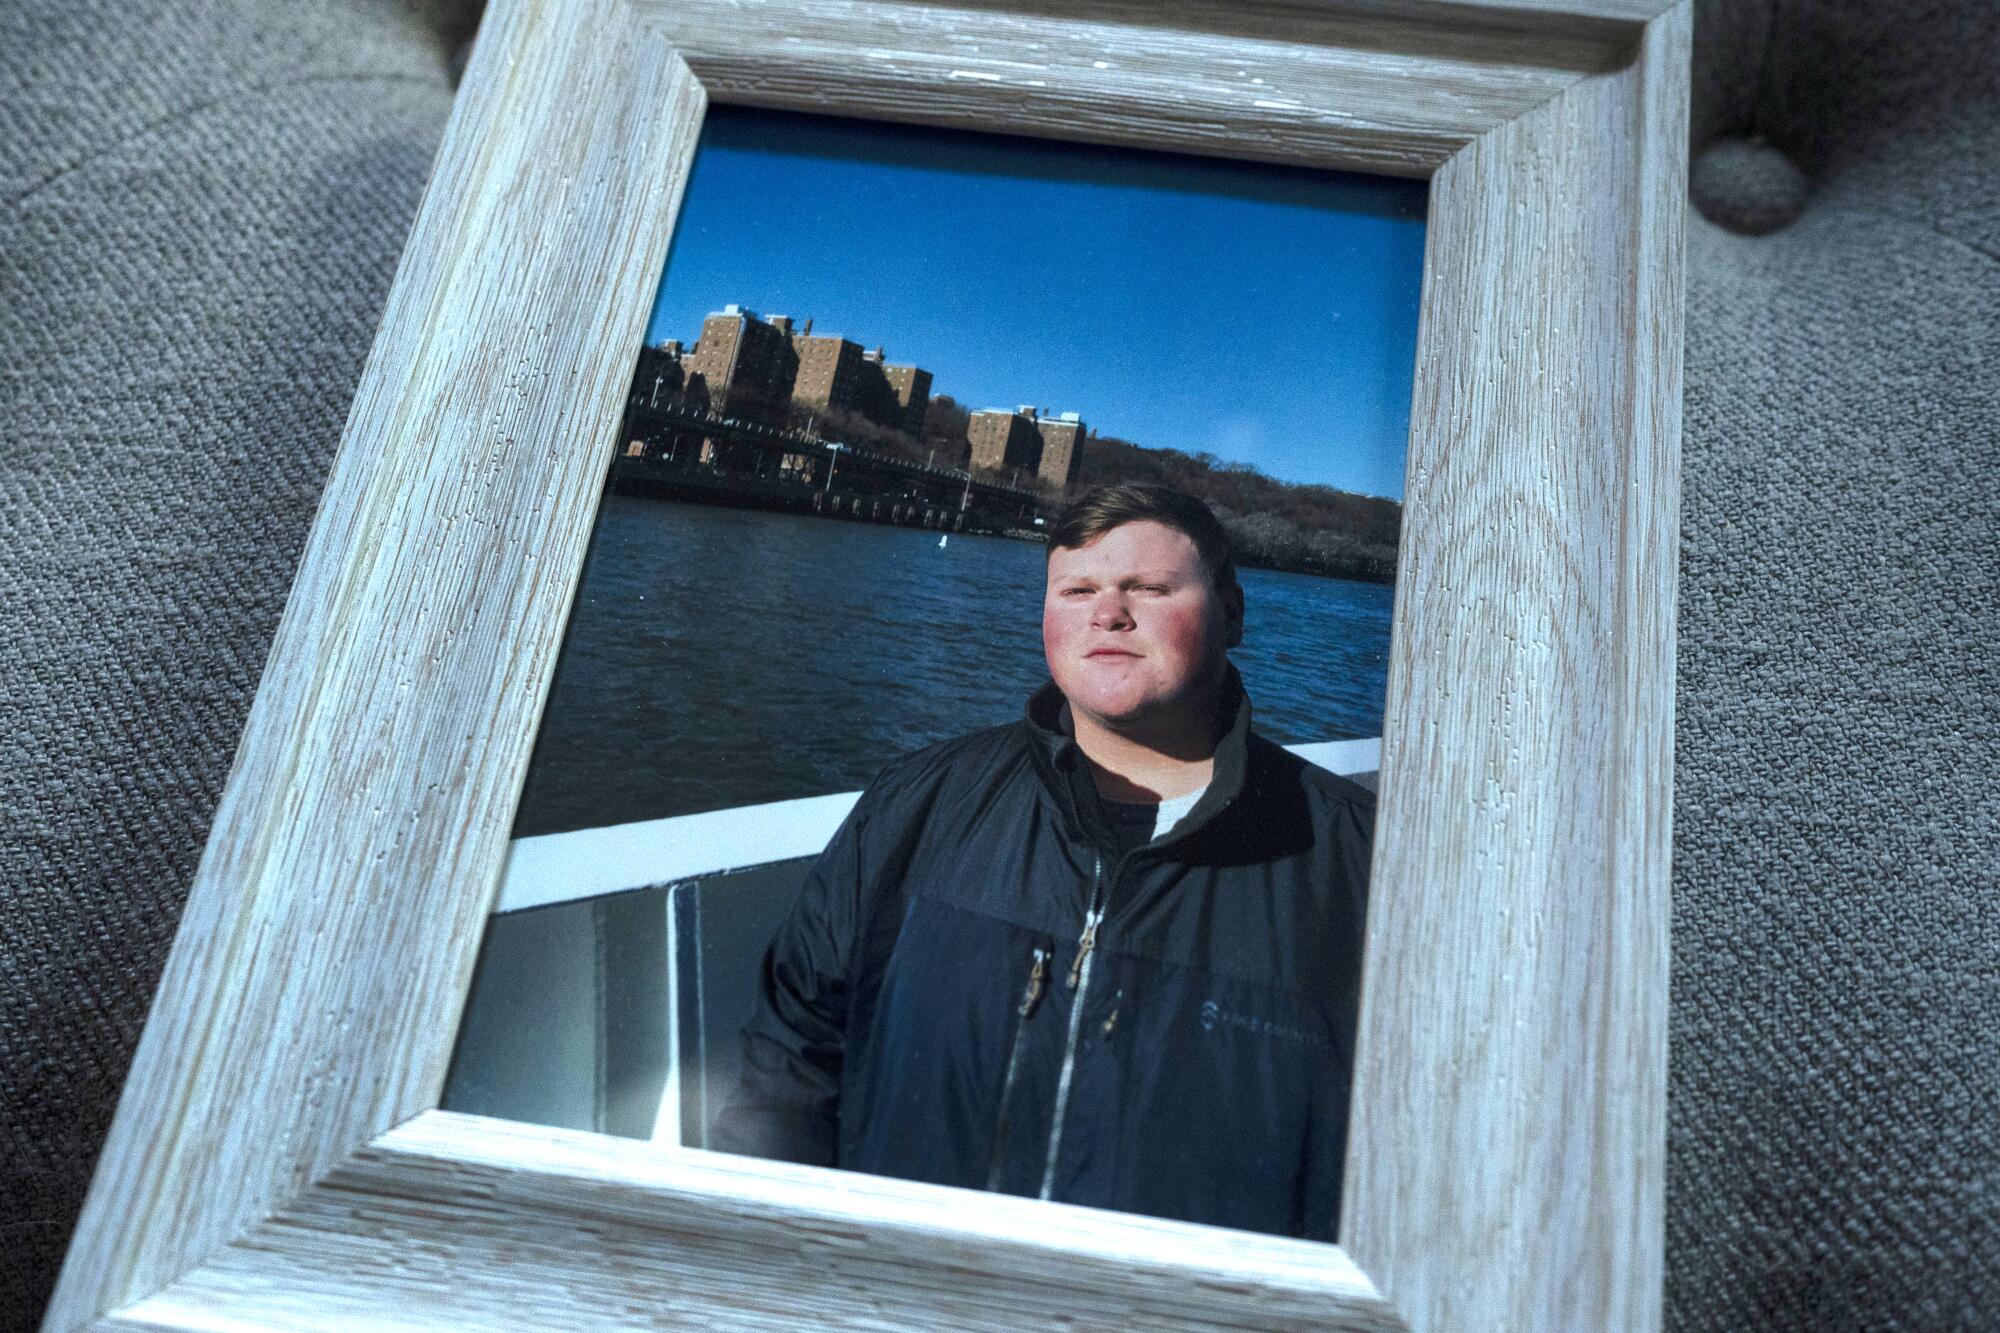 A photo of Ryan Christopher Bagwell in New York is displayed.